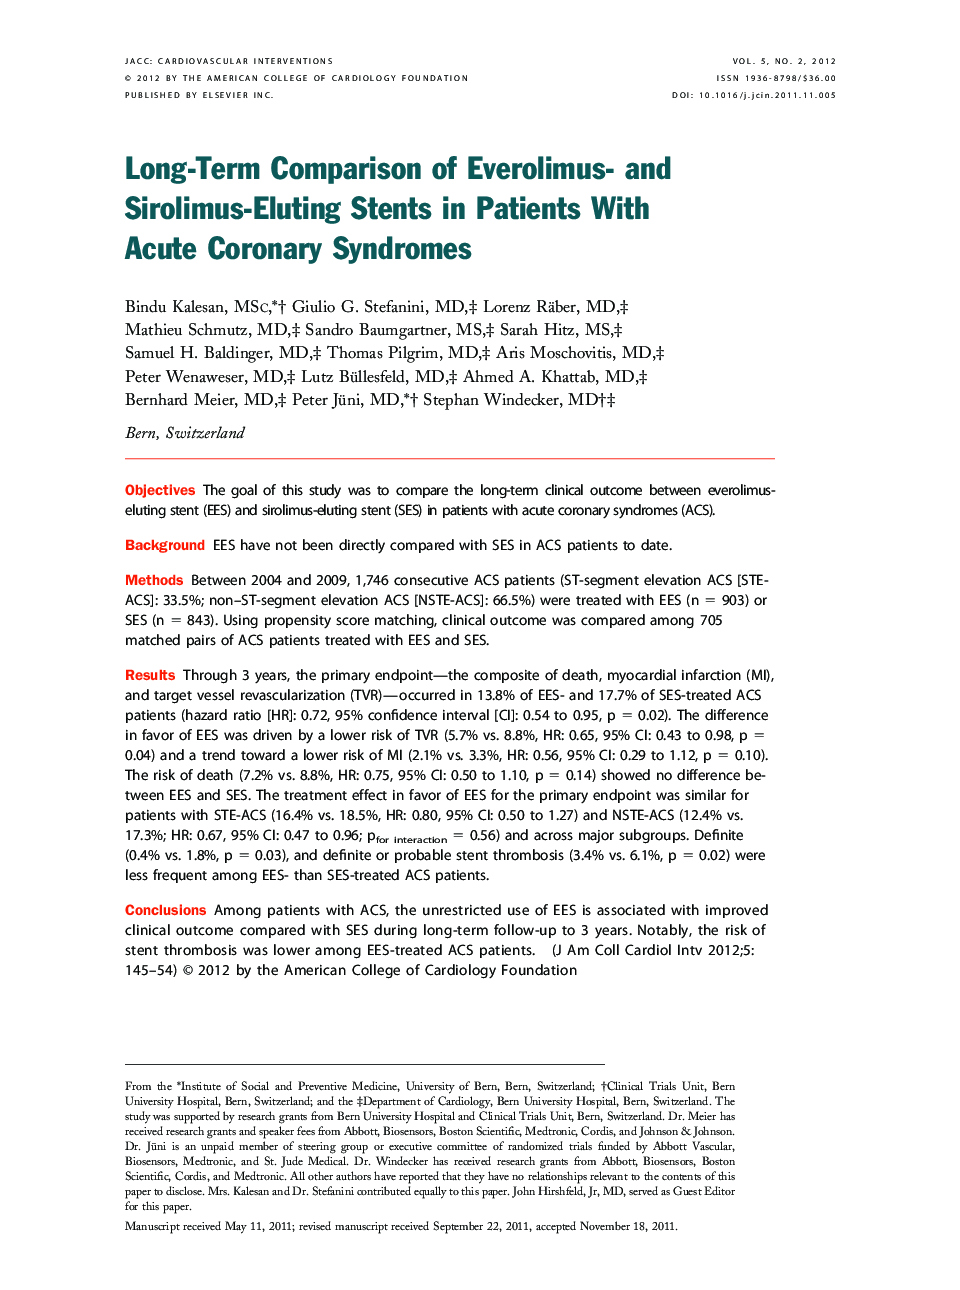 Long-Term Comparison of Everolimus- and Sirolimus-Eluting Stents in Patients With Acute Coronary Syndromes 